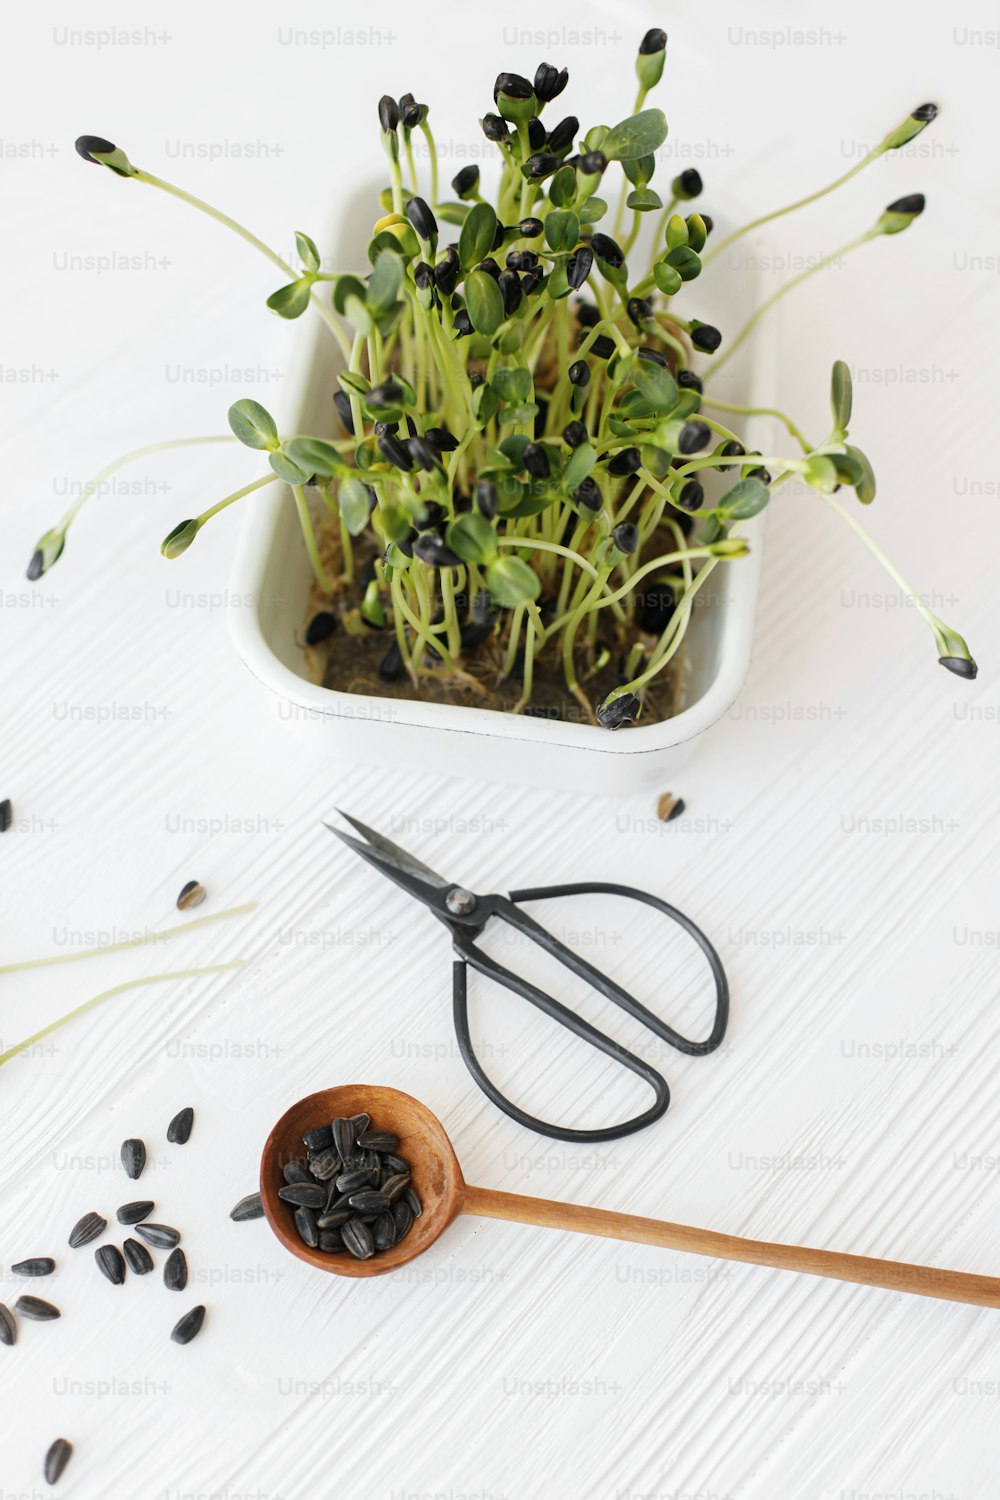 Growing microgreens at home. Fresh sunflowers sprouts, wooden spoon with seeds, scissors on white wood. Sunflower sprouter, microgreen. Hydroponics